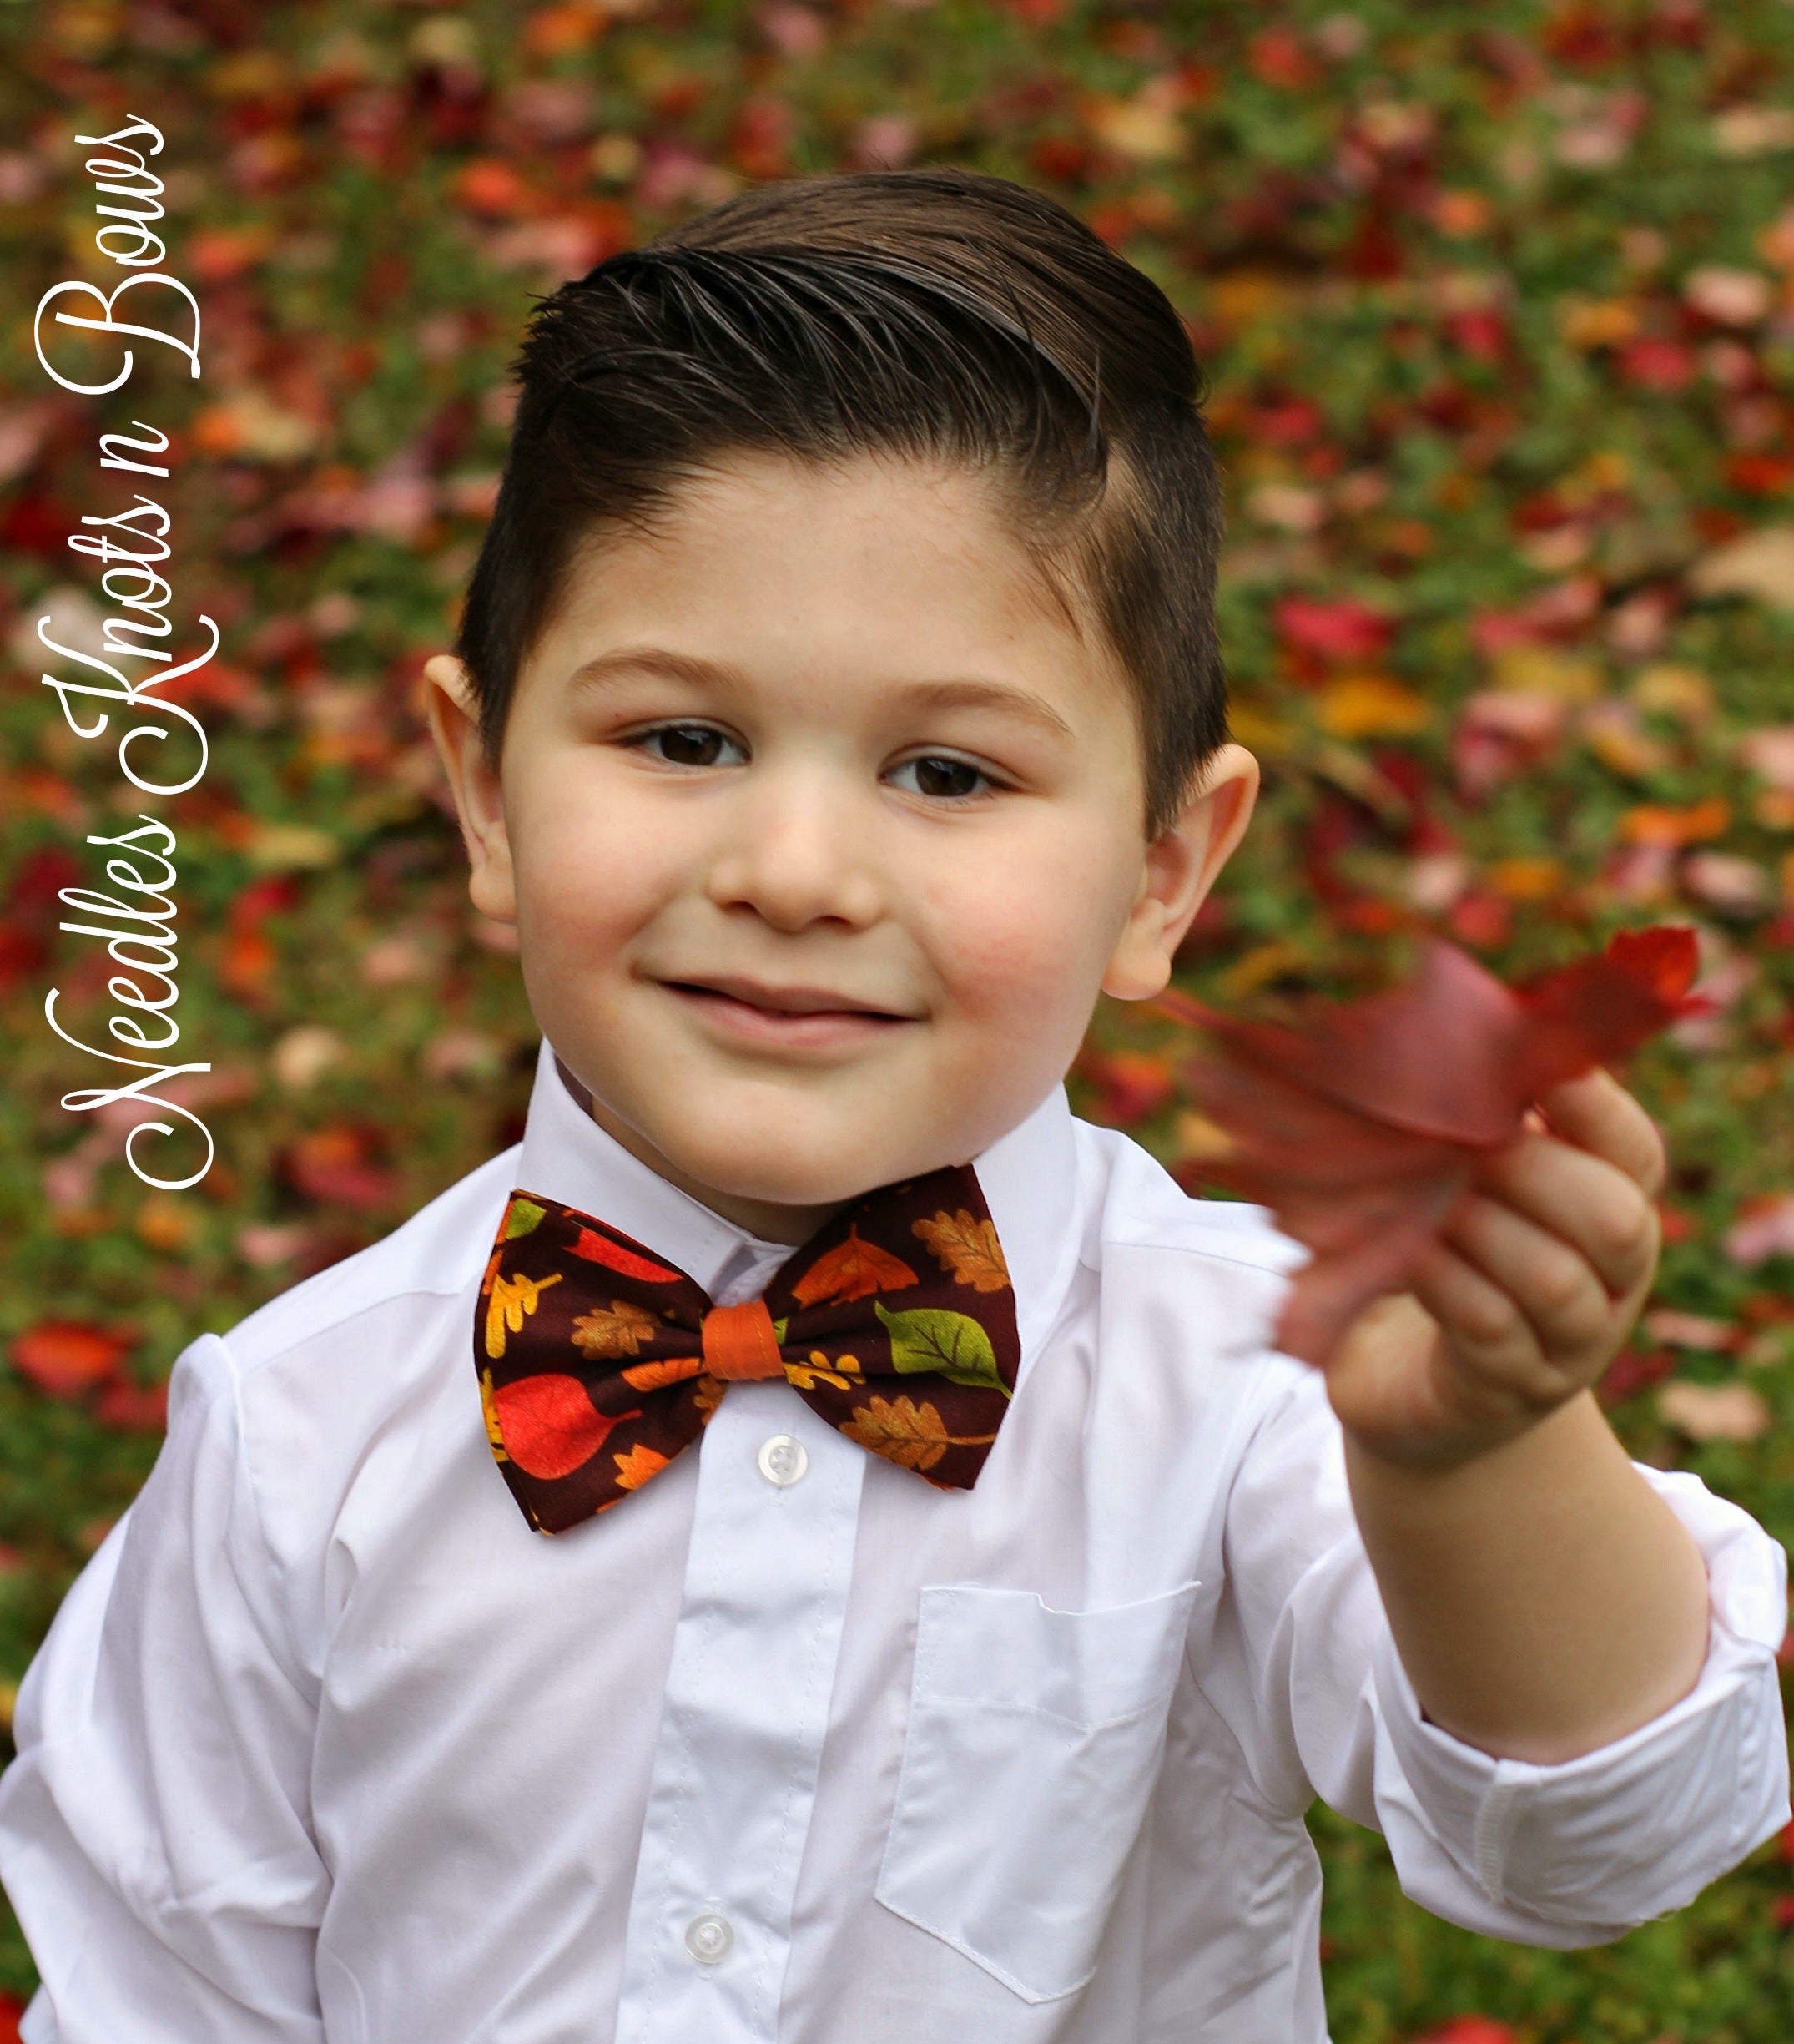 Fall Leaves Print Bow Tie, Fall Foilage Leaves, Autumn Leaves